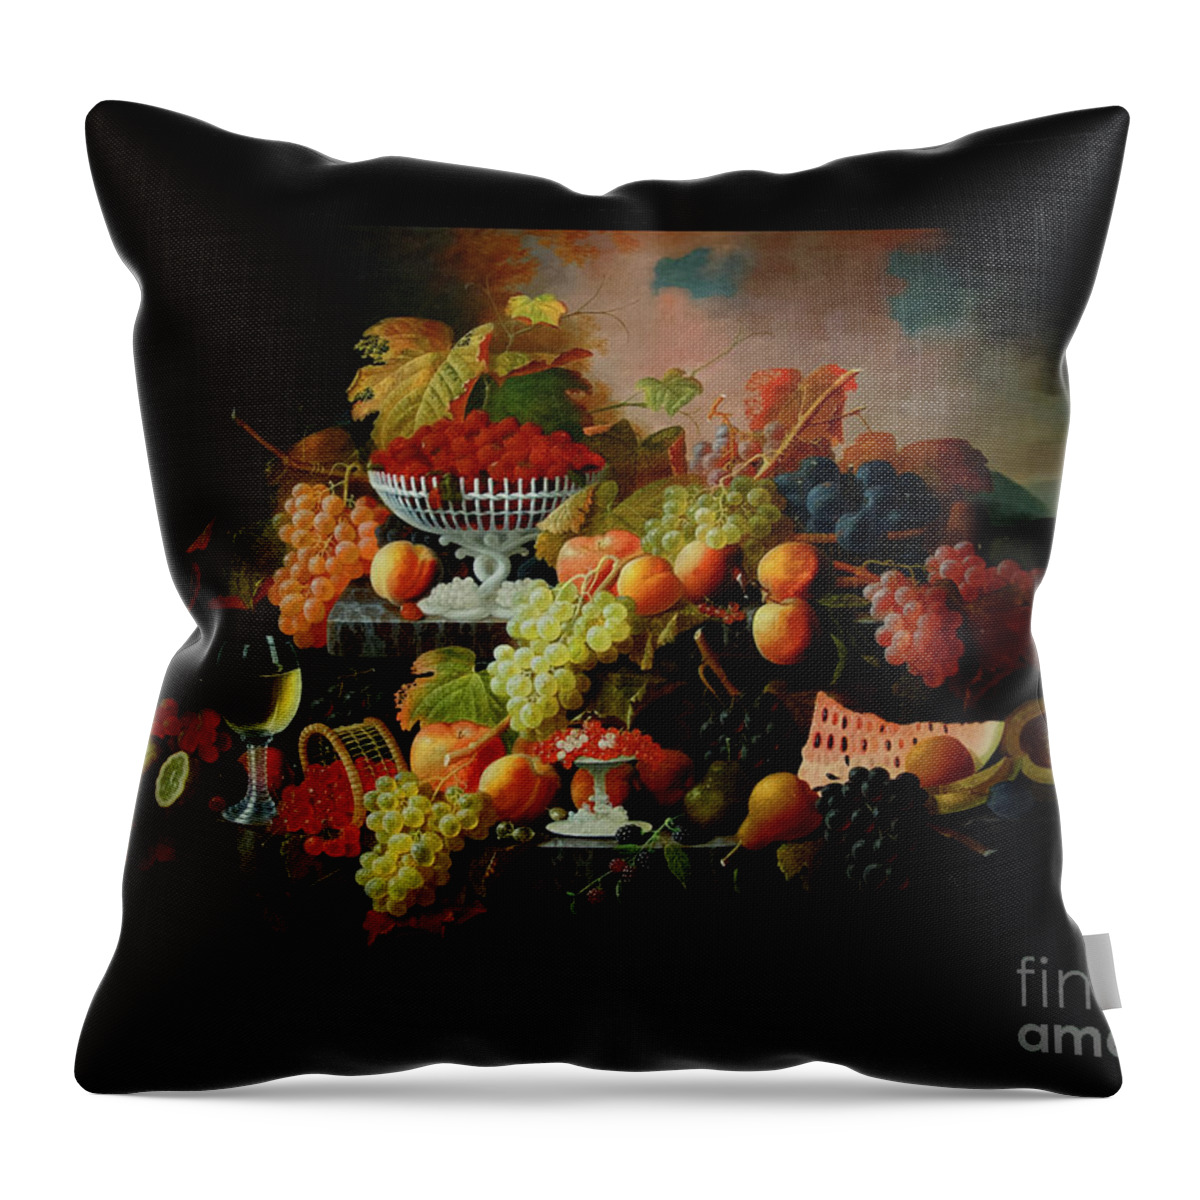 Abundance Of Fruit Throw Pillow featuring the painting Abundance of Fruit by Severin Roesen Old Masters Classical Fine Art Reproduction by Rolando Burbon